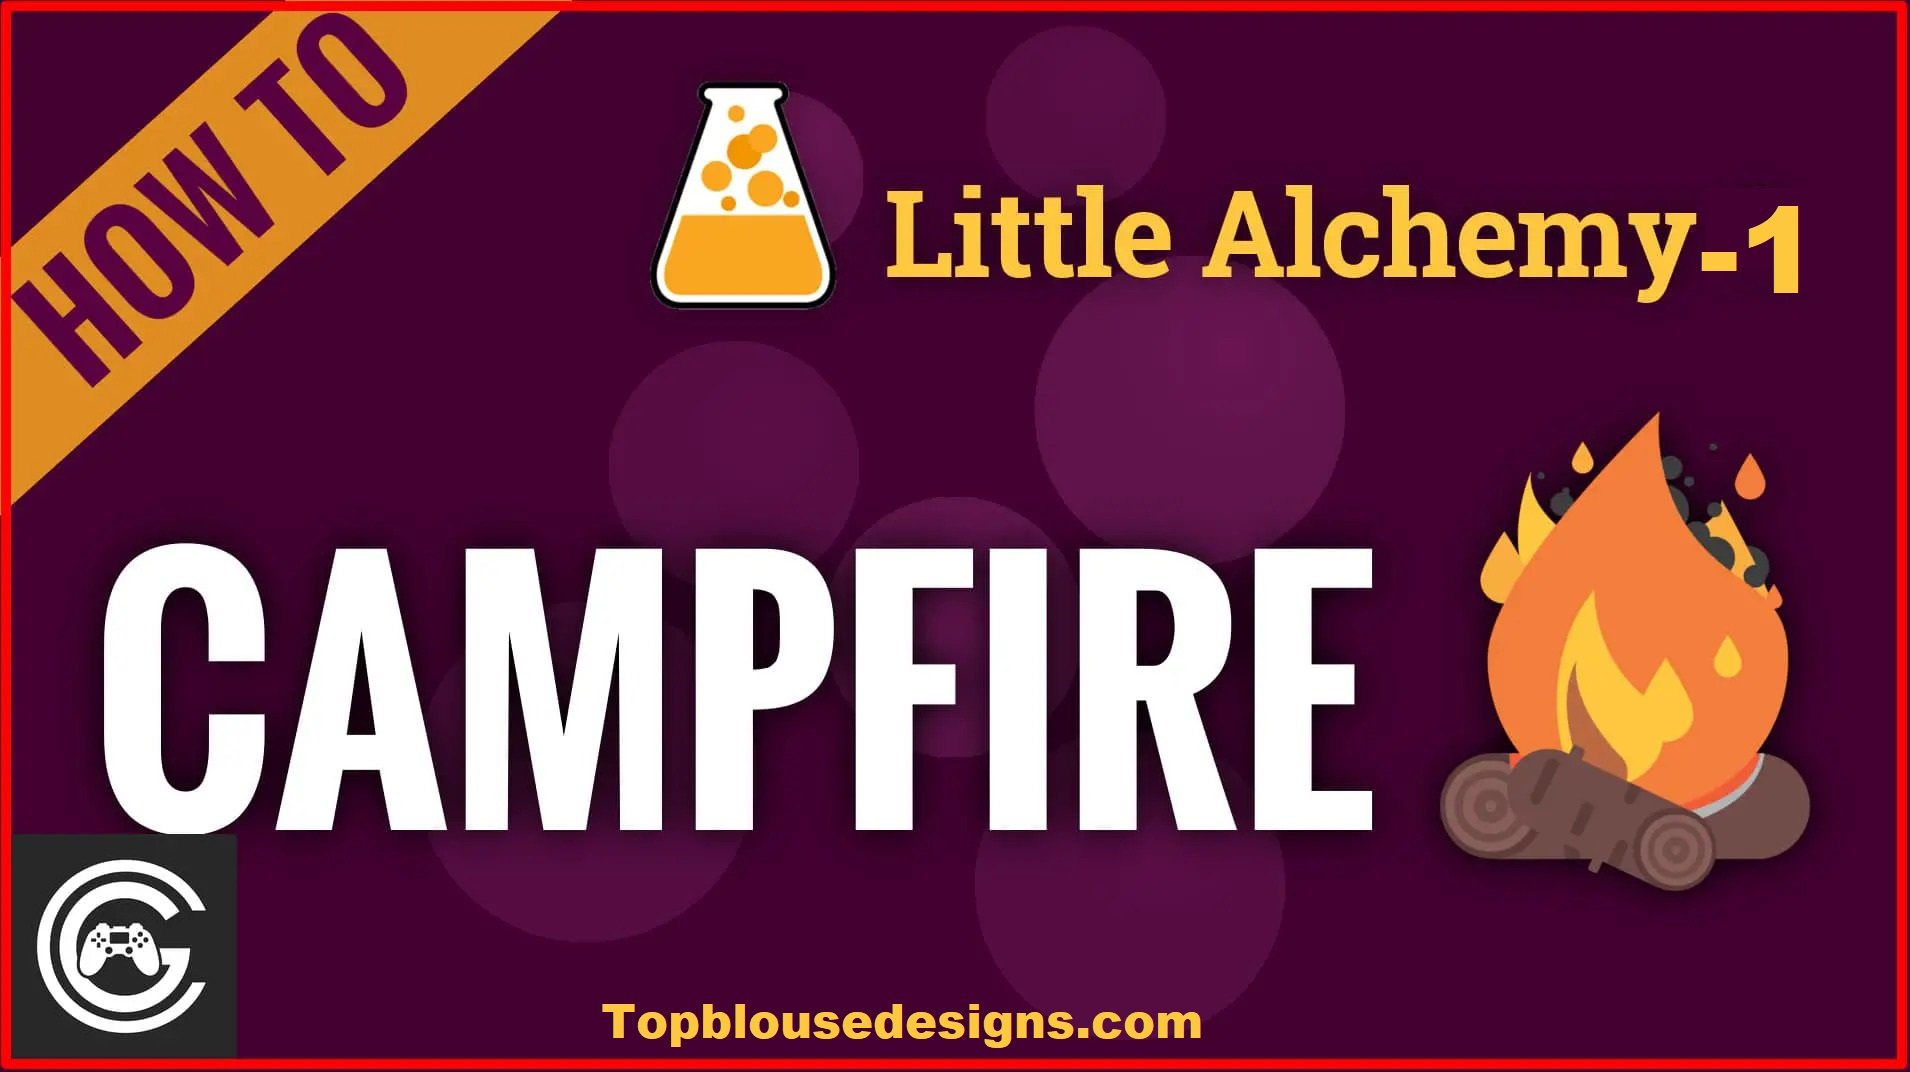 How to Make Campfire in Little Alchemy 1